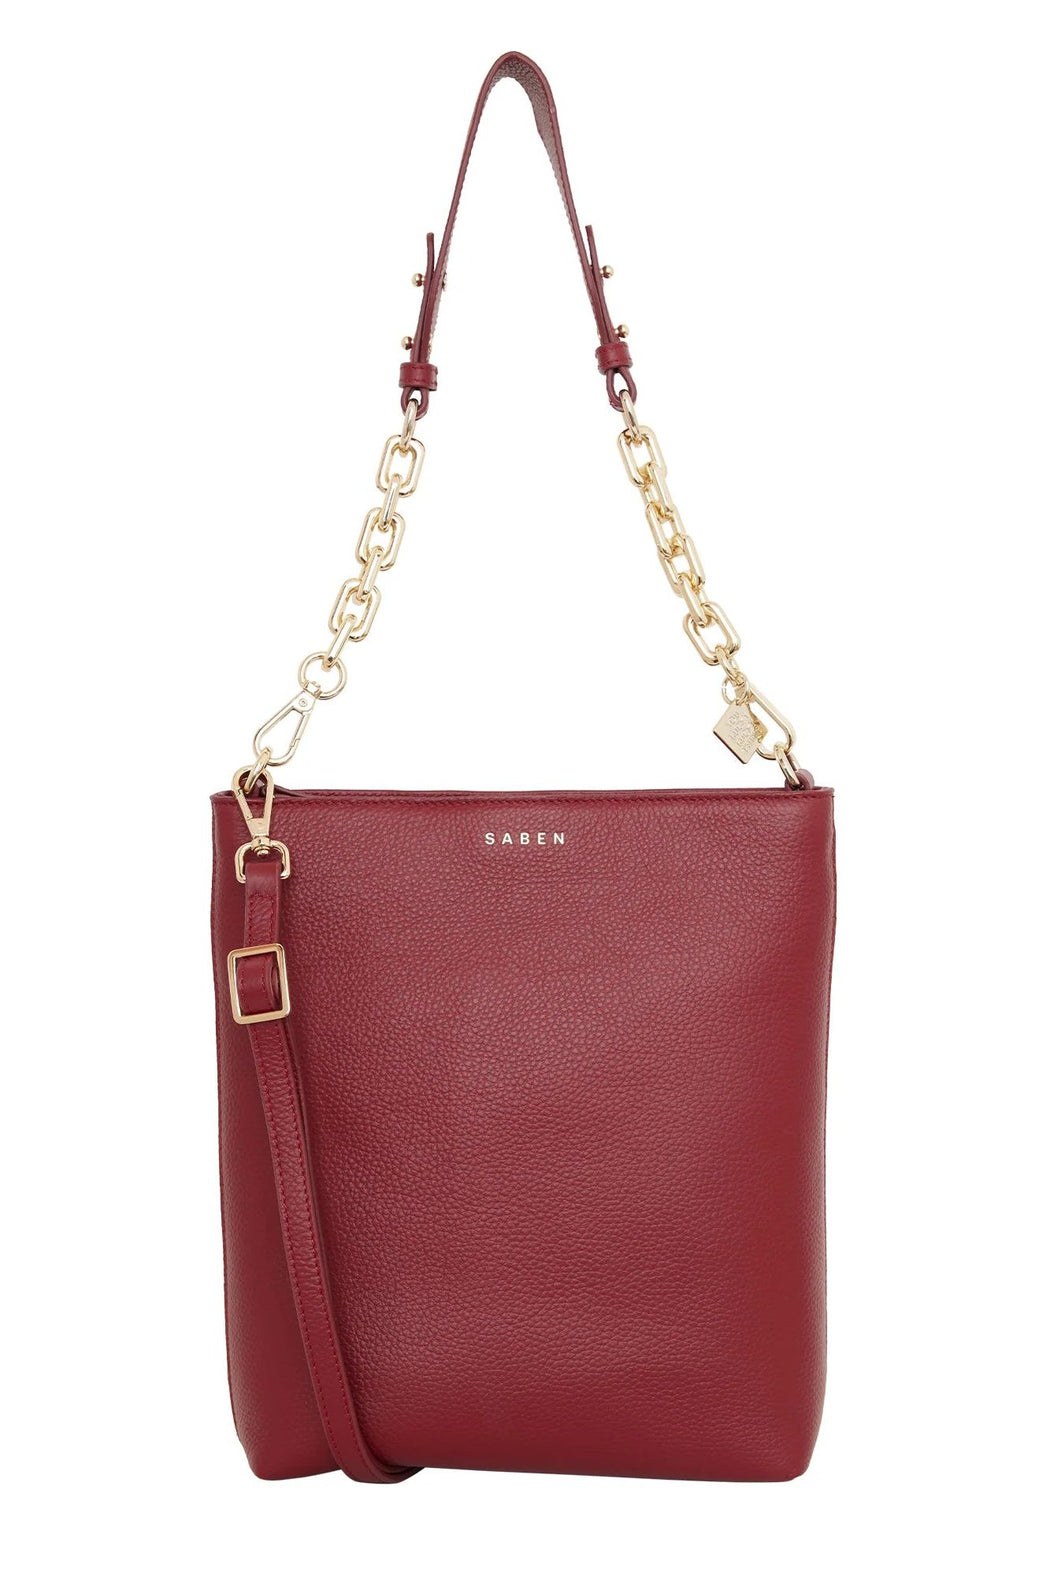 Claudette-Chunky Chain Handle - Cherry